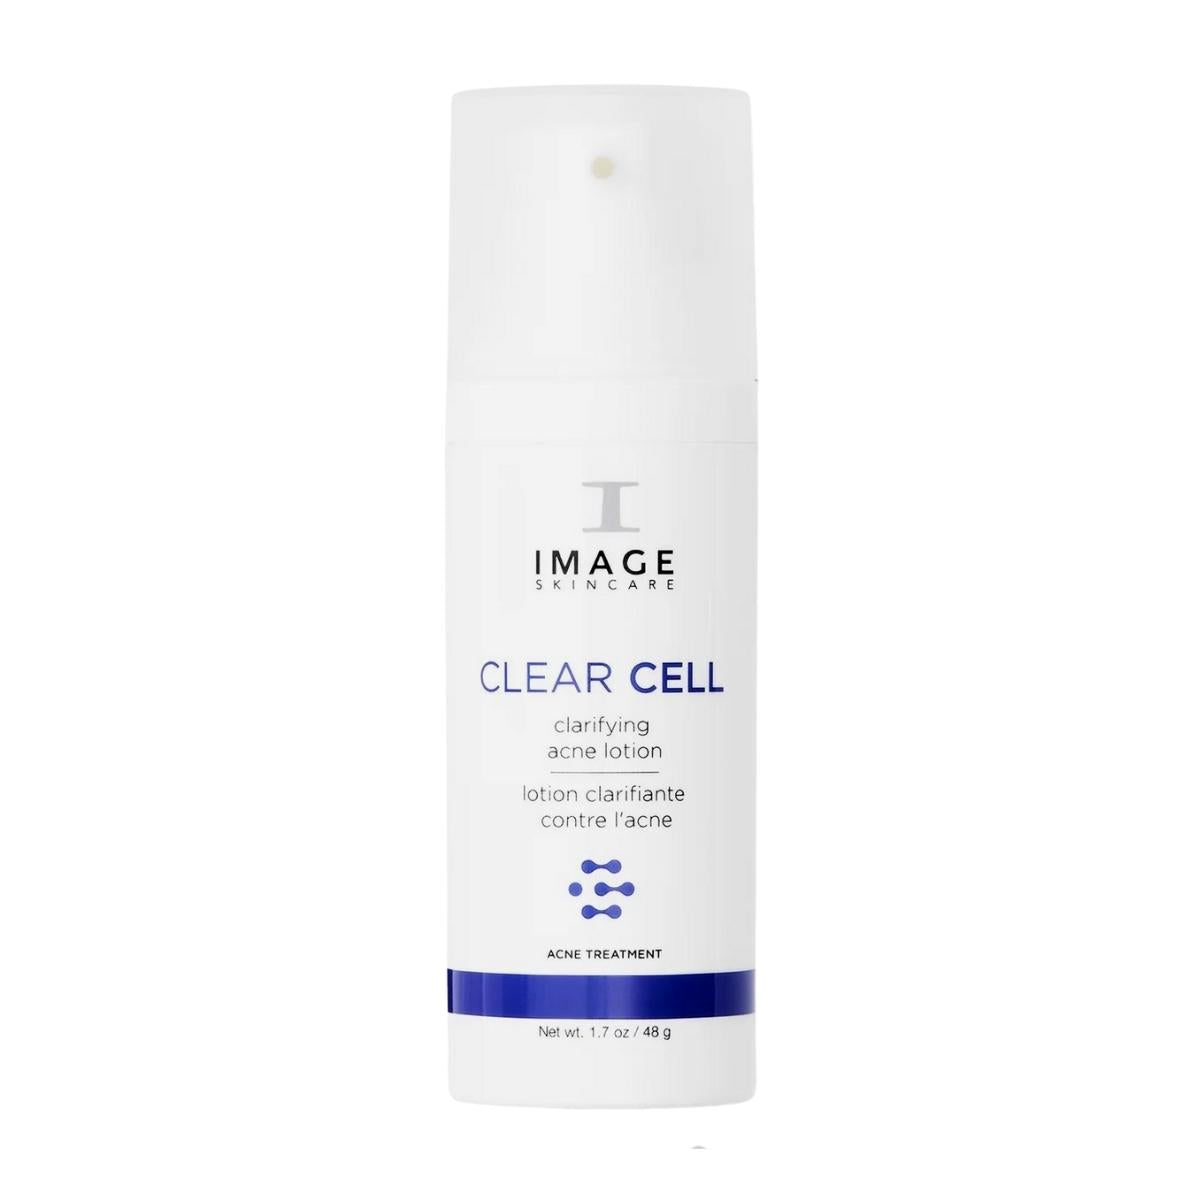 IMAGE Skincare Clear Cell Clarifying Acne Lotion 